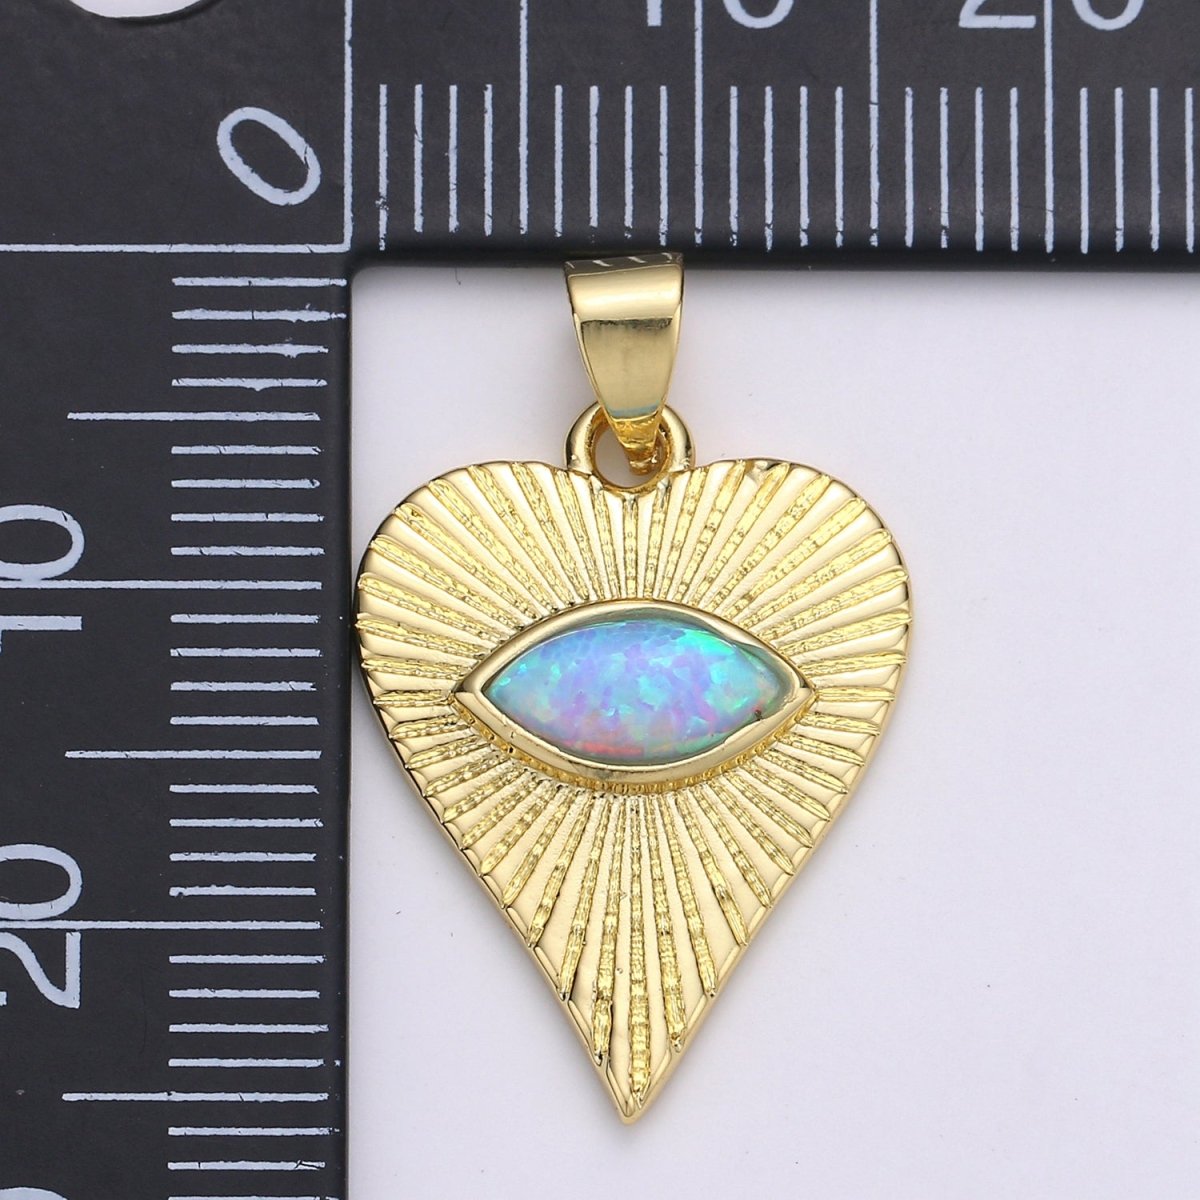 26x16mm Wholesale 14K Yellow Gold Filled Eye of Ra in Heart Pendant, Sparkling Synthetic Opal Pendant Pendant for Necklace Bracelet Anklet Making J-219 - DLUXCA